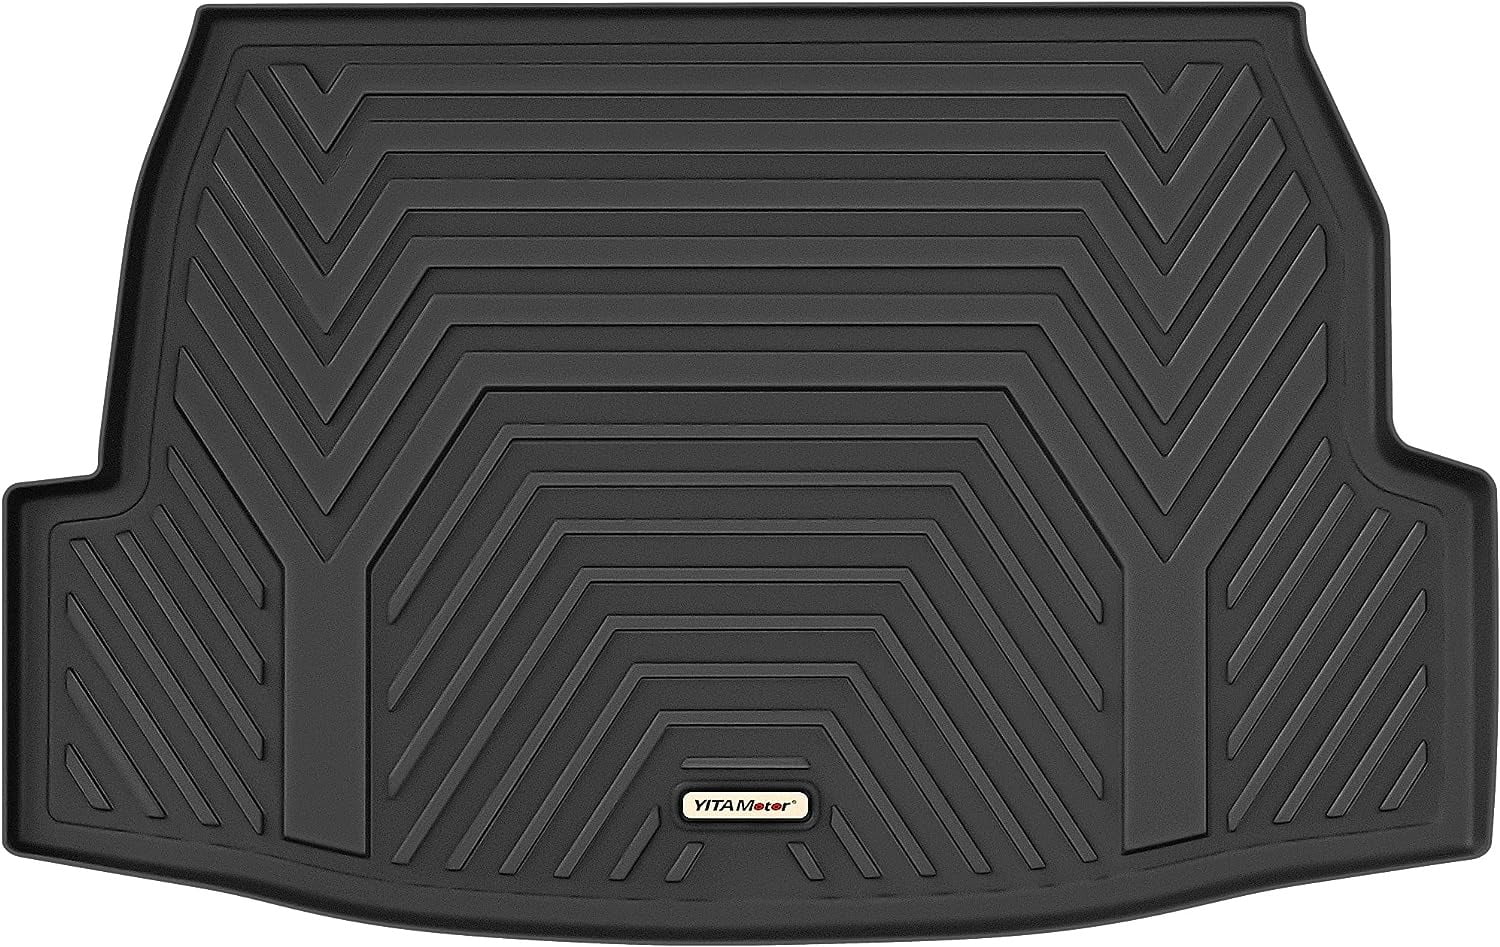  BACKFIVE Custom Car Cargo Mat Car Boot Liner Waterproof  Anti-Slip All Weather Protection Leather Material, Compatible with 99% Car  Model Trunk Carpet Liners (Black) : Automotive